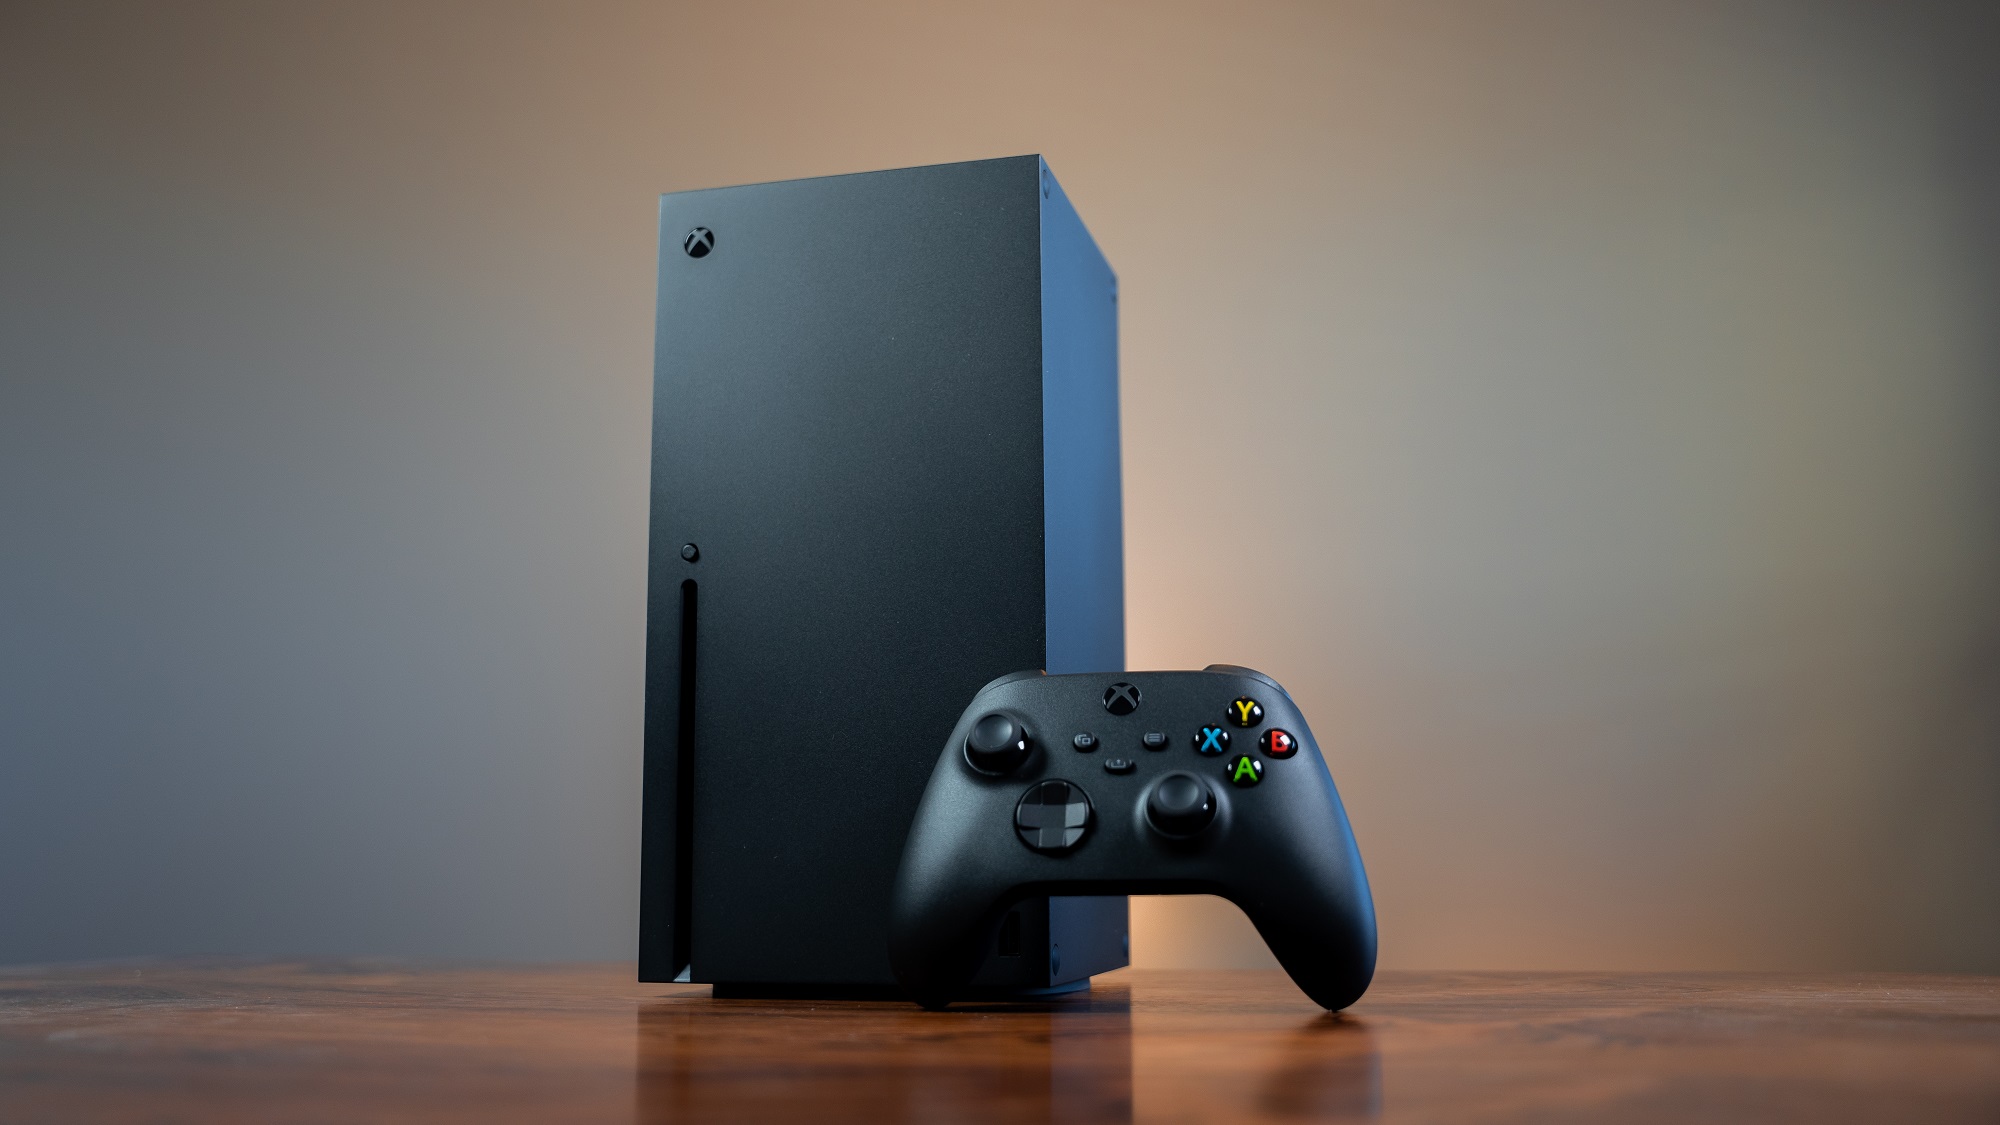 Xbox Series X vs Xbox One X: will it be worth the upgrade?